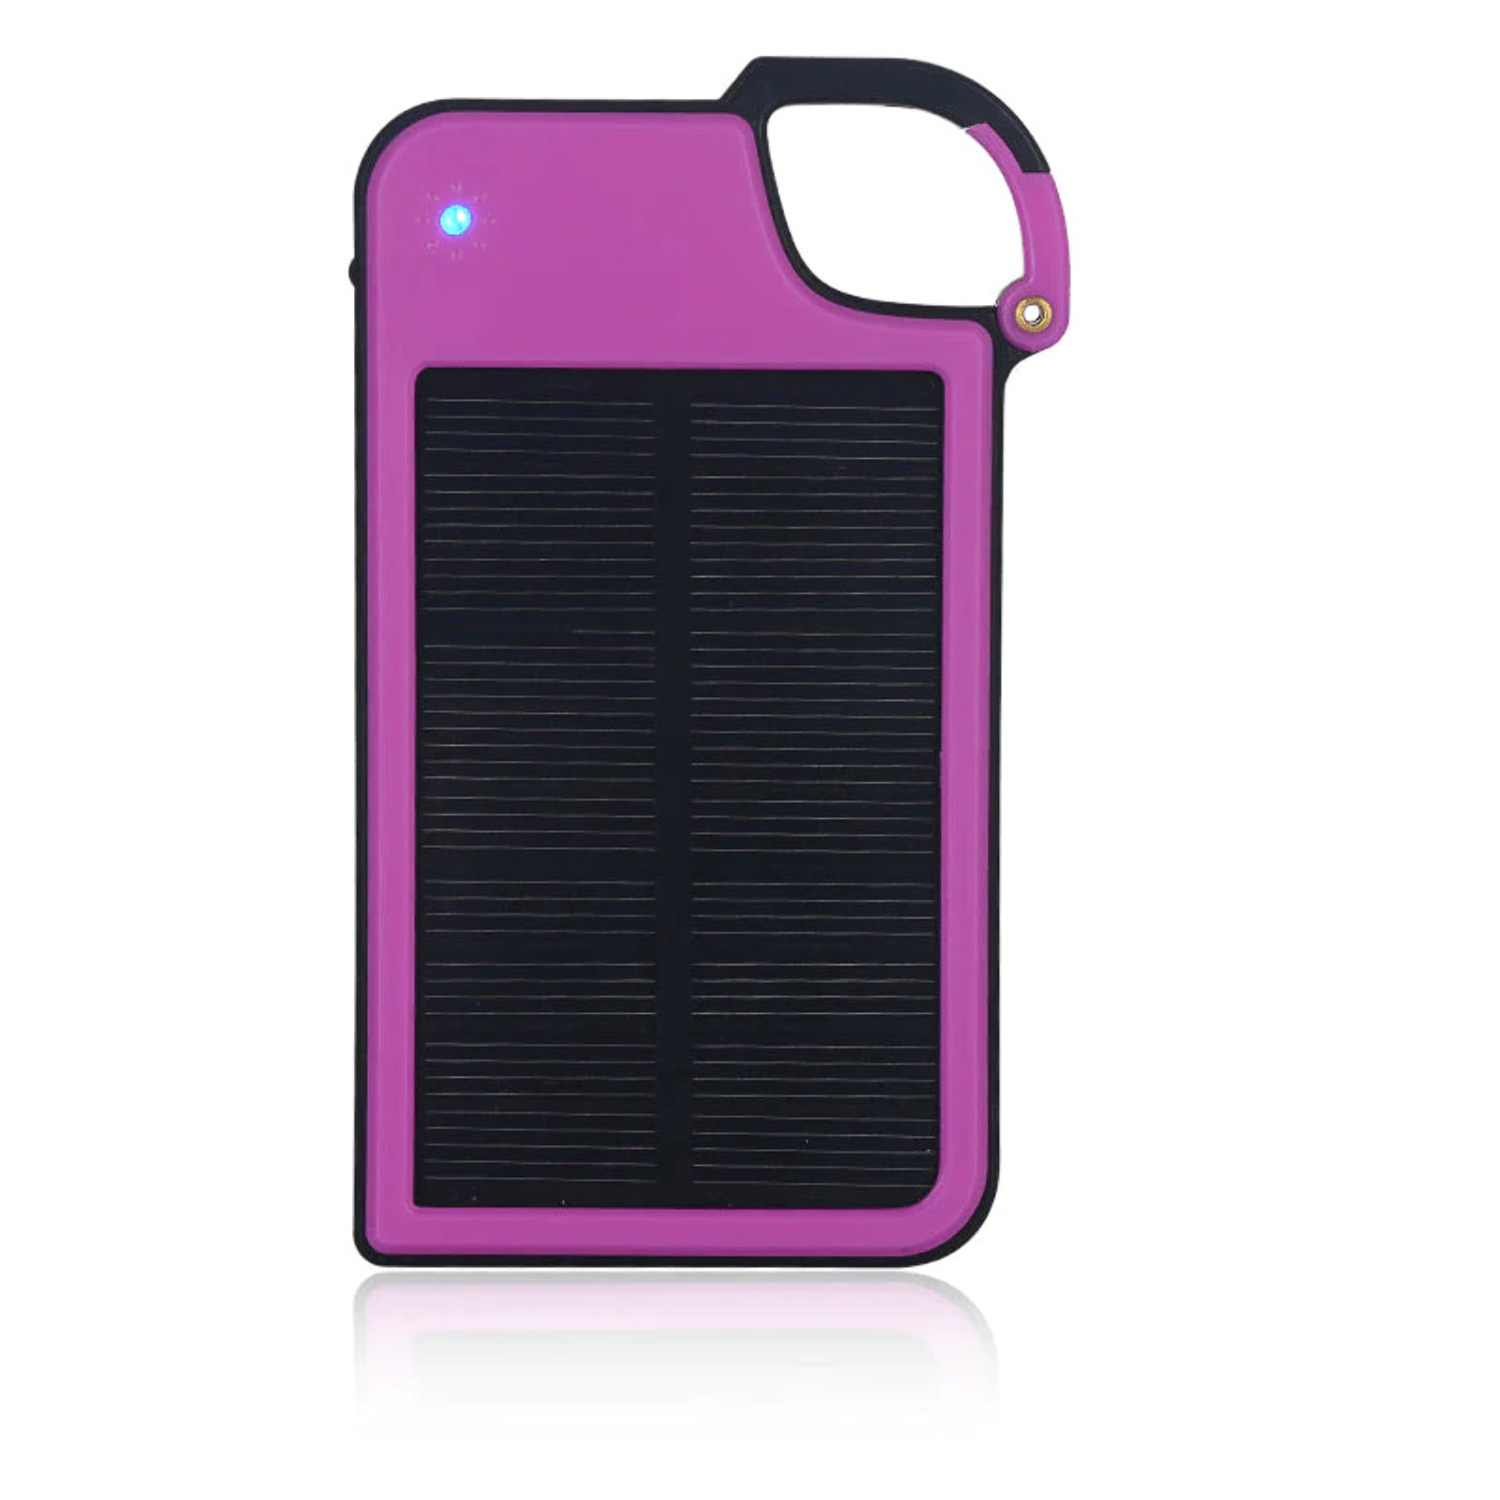 Clip-on Tag Along Solar Charger and 4050 mAh PowerBank For Your Smartphone - image 5 of 6